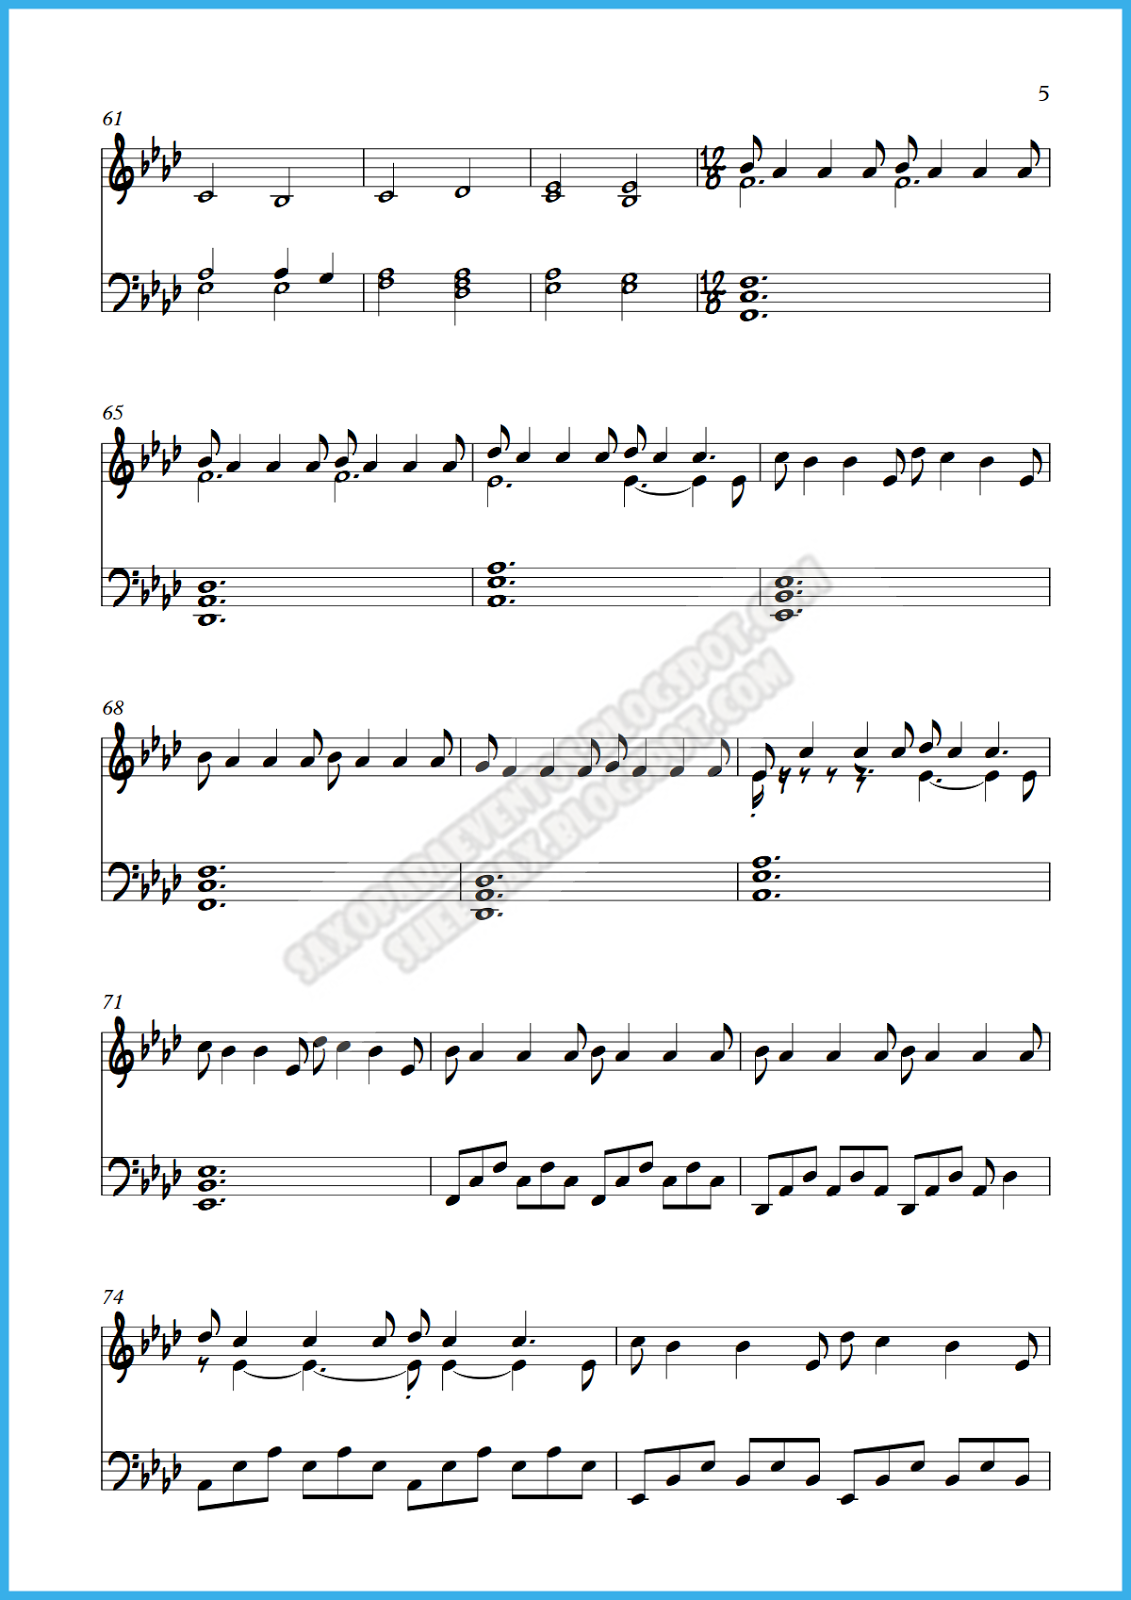 Nuvole Bianche Sheet Music Pdf Rollbaldcircle Download and print in pdf or midi free sheet music for nuvole bianche by ludovico einaudi arranged by miguel_ingelbeen for piano (solo). rollbaldcircle